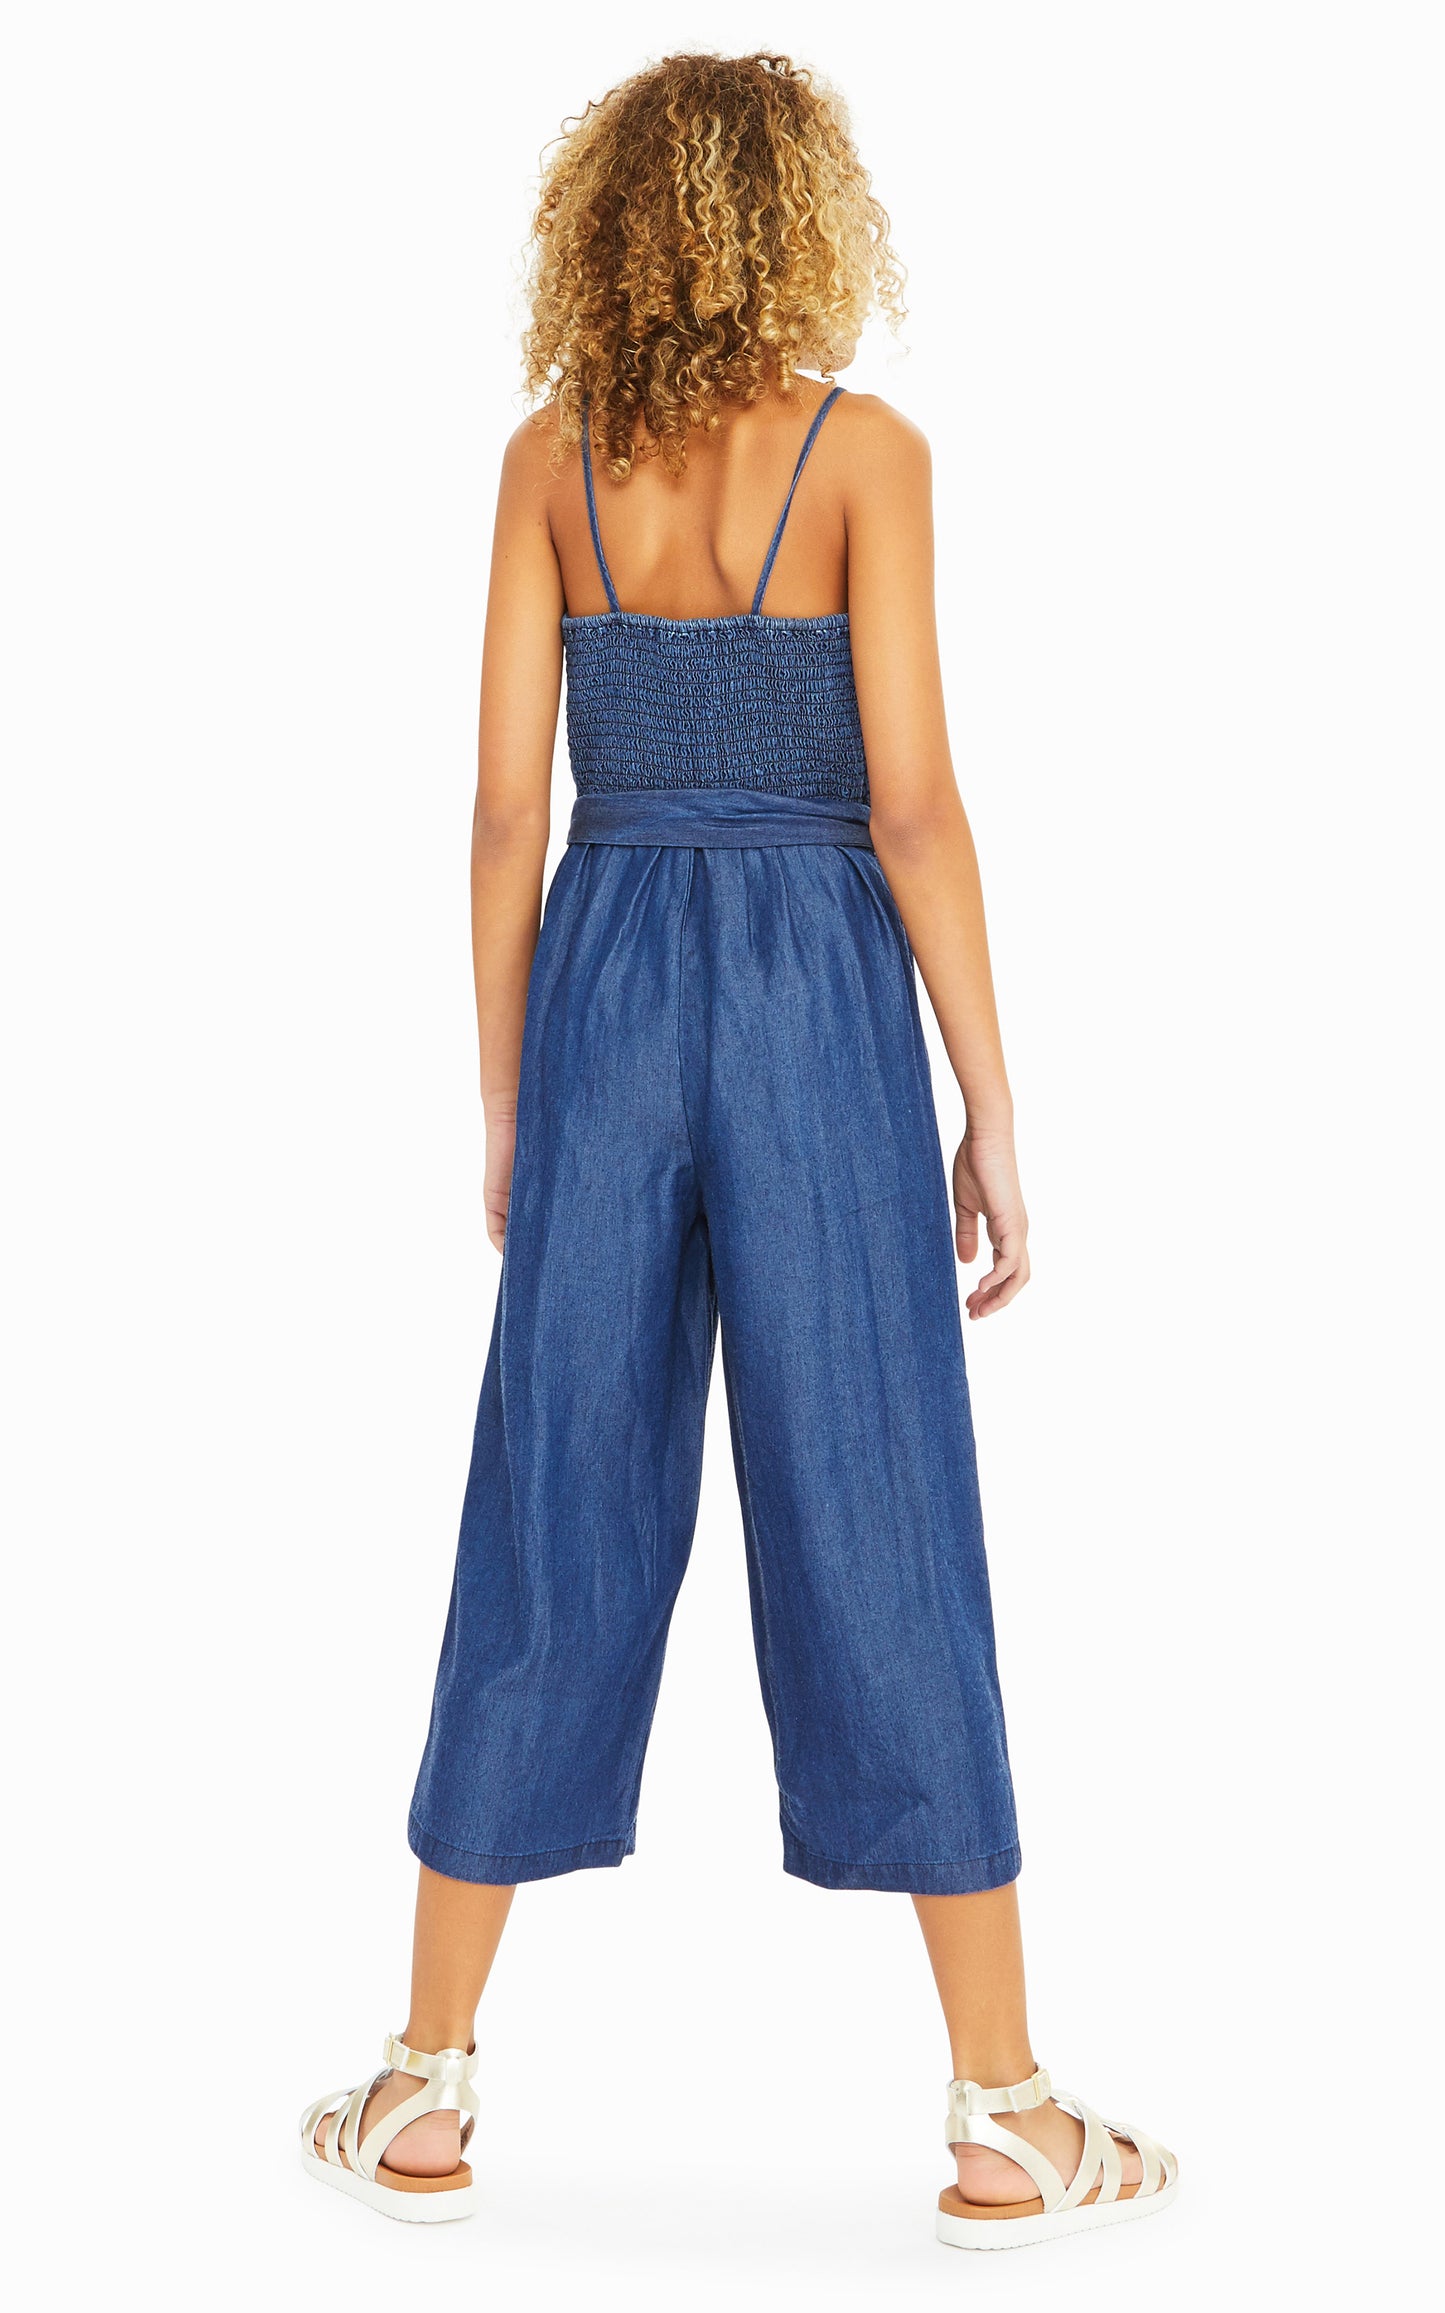 Back view of girl wearing denim-colored sleeveless jumpsuit with belted waist.